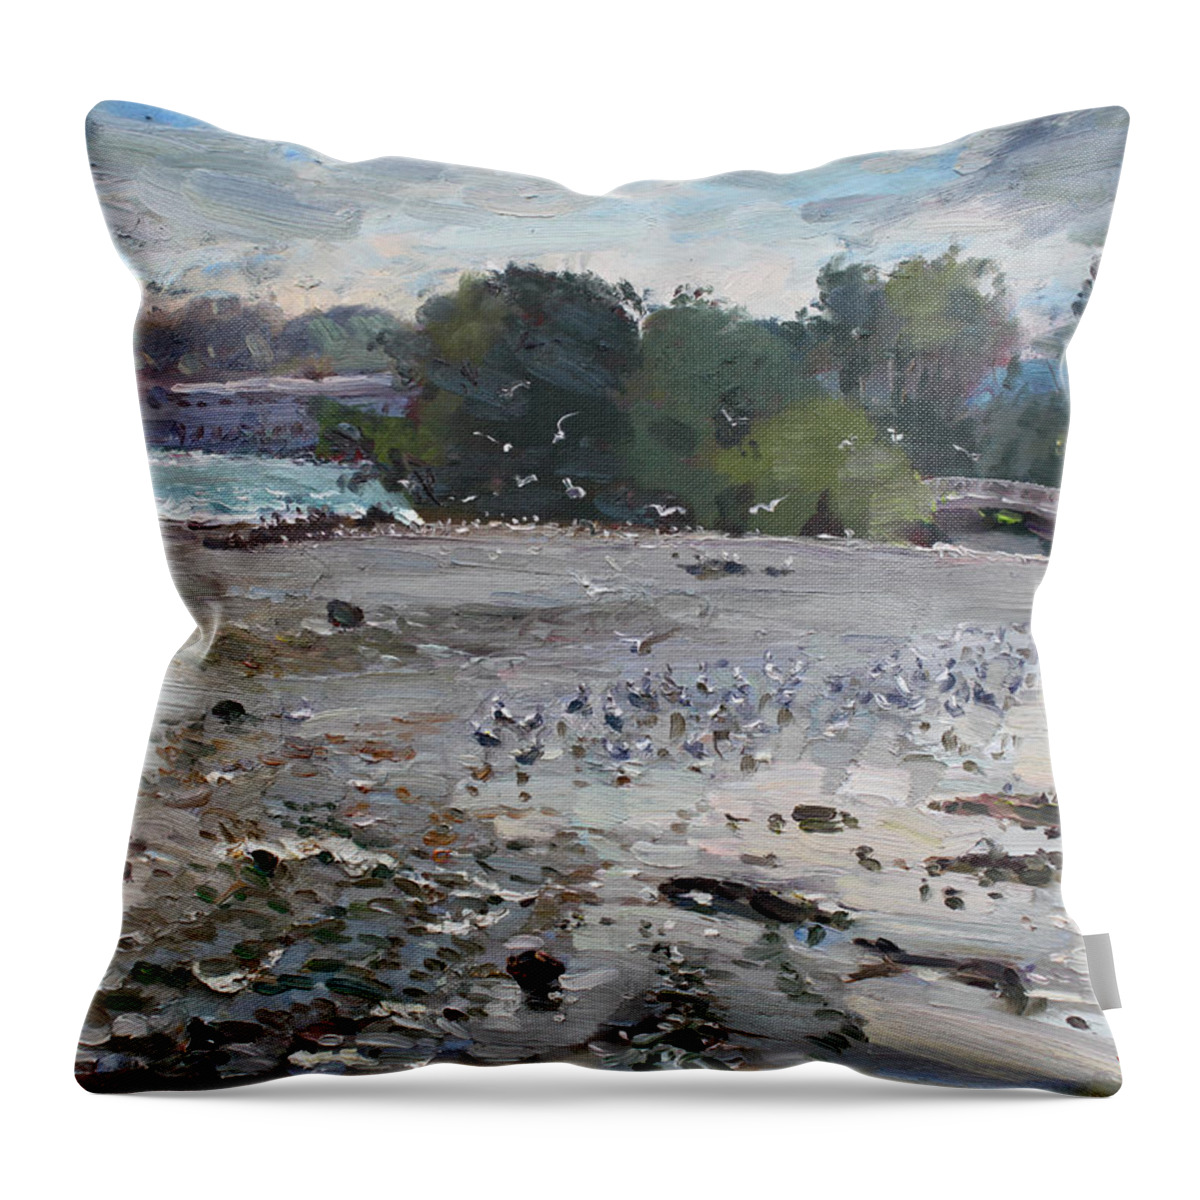 Seagulls Throw Pillow featuring the painting Seagulls on Niagara River by Ylli Haruni